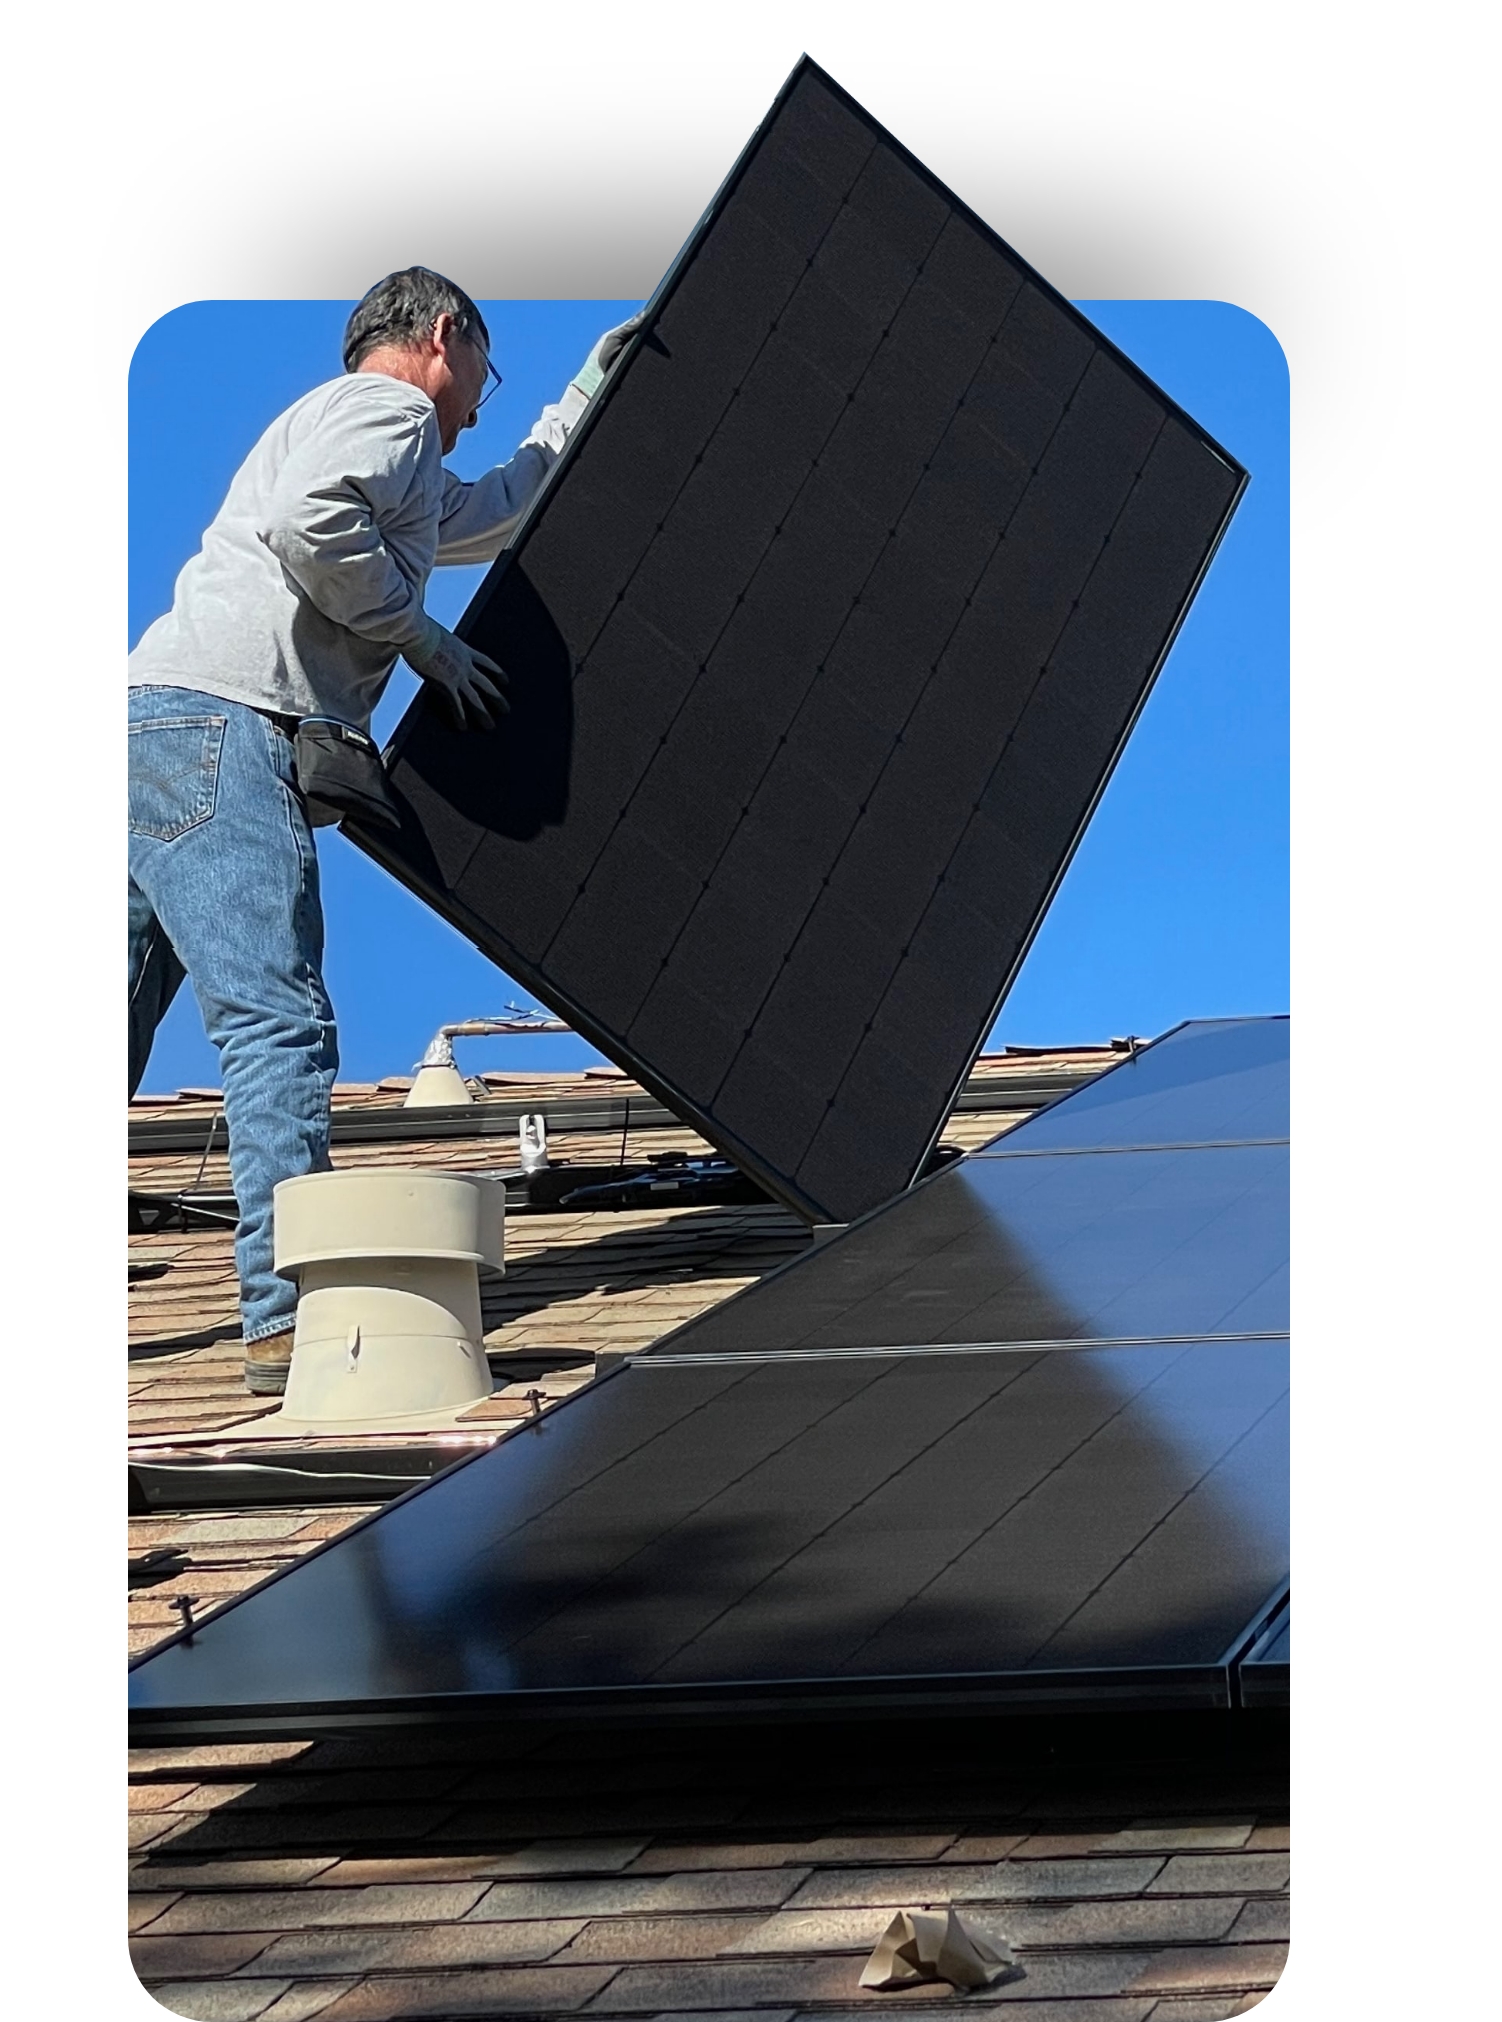 Need help with your insurance company? Our solar panel installers are the best among solar companies in Colorado. Compare quotes and get ready to save on your electric bills with the best service and great communication from a locally-owned and operated solar system expert.